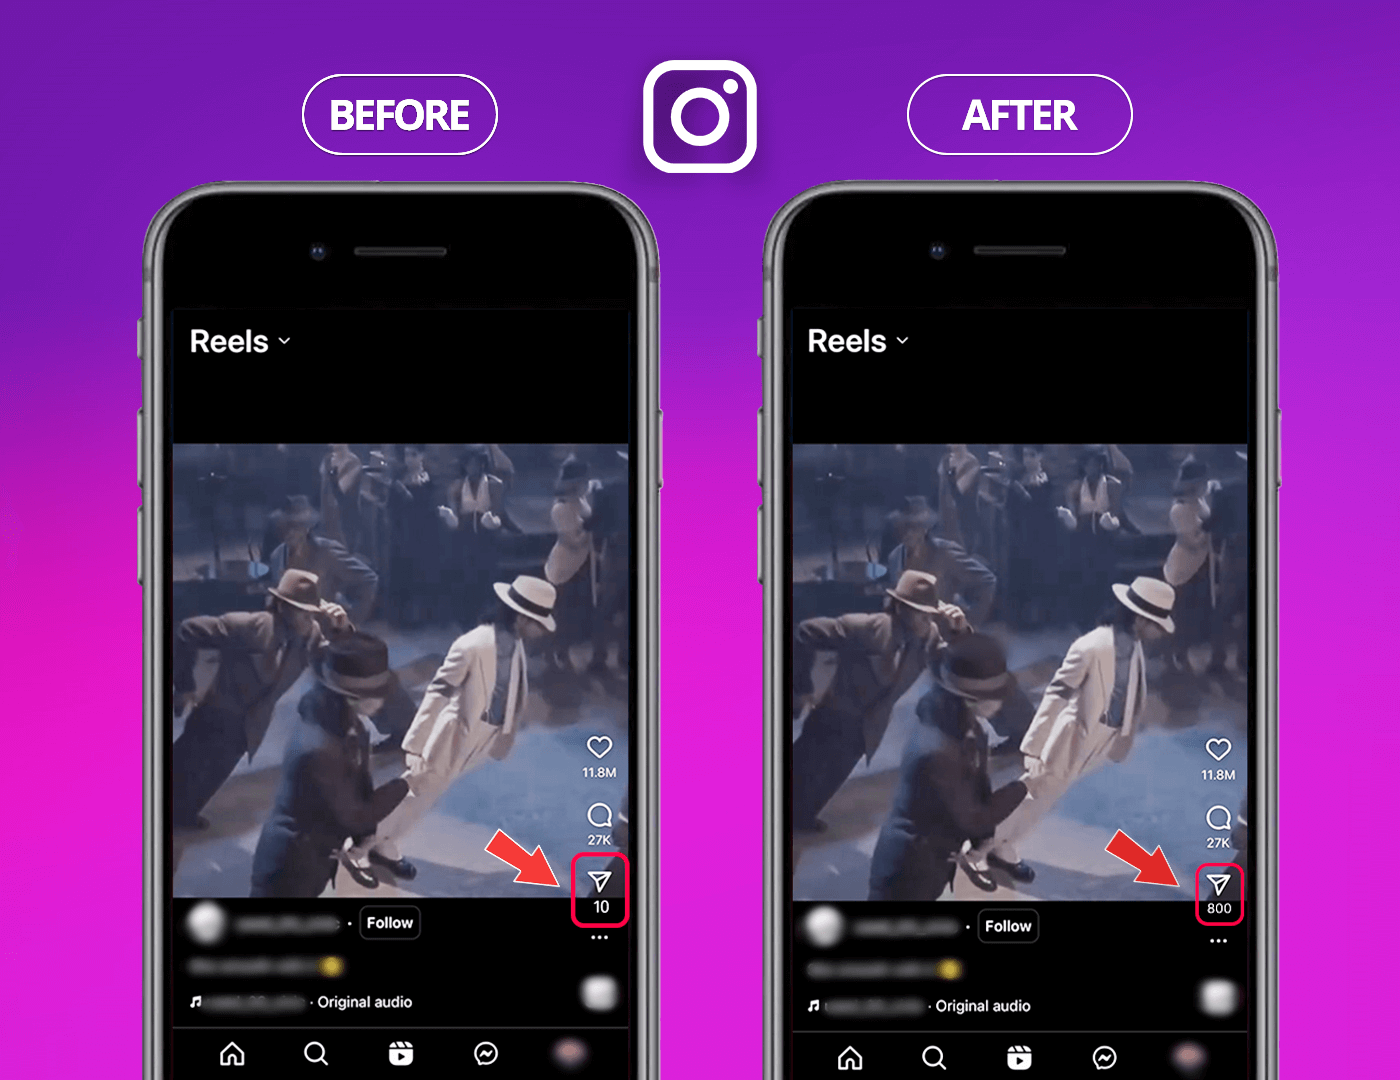 How to Buy Instagram Reels Shares